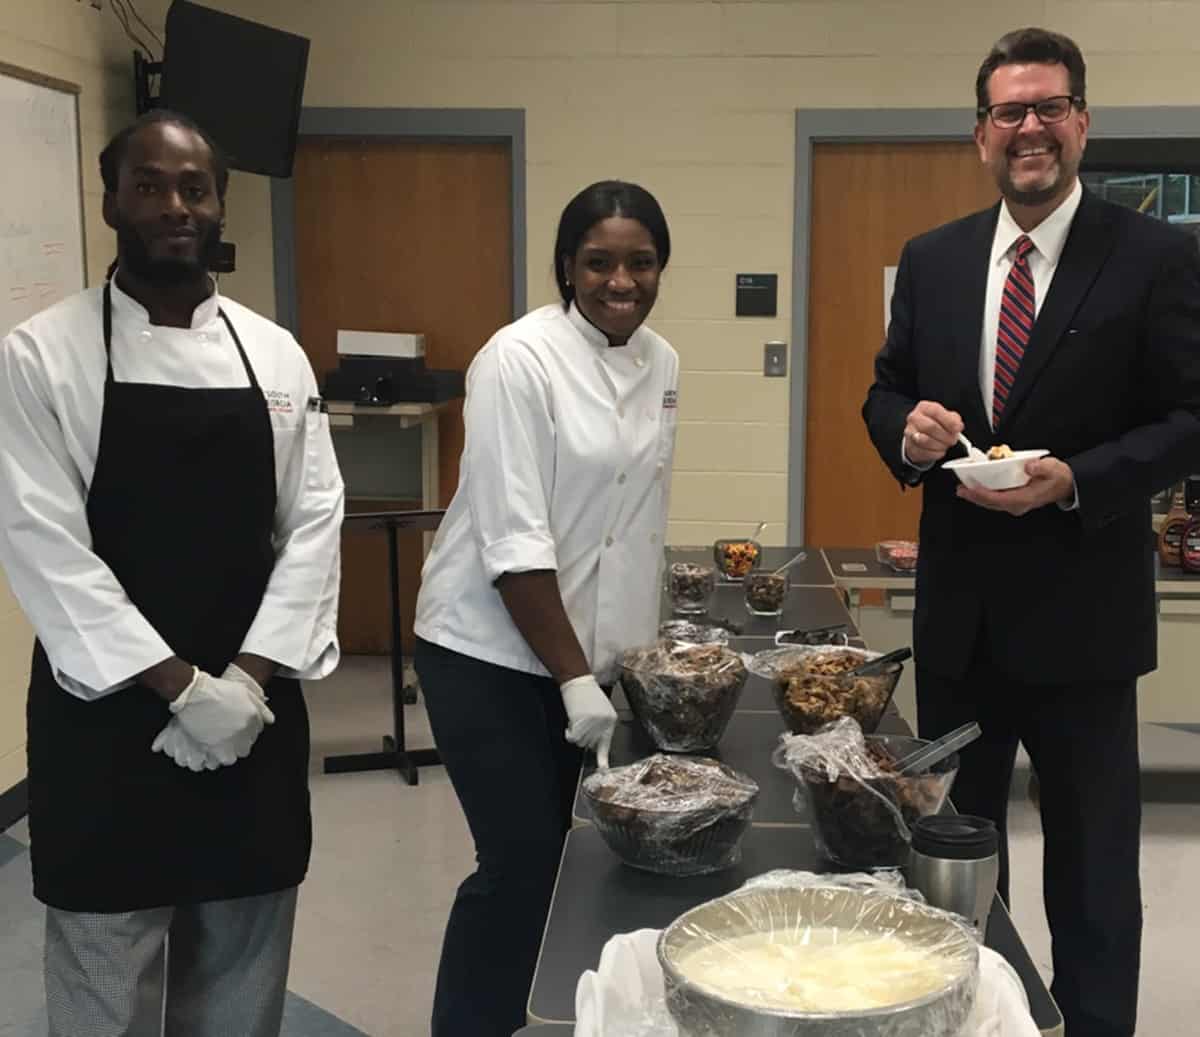 Dr. John Watford pose with culinary students